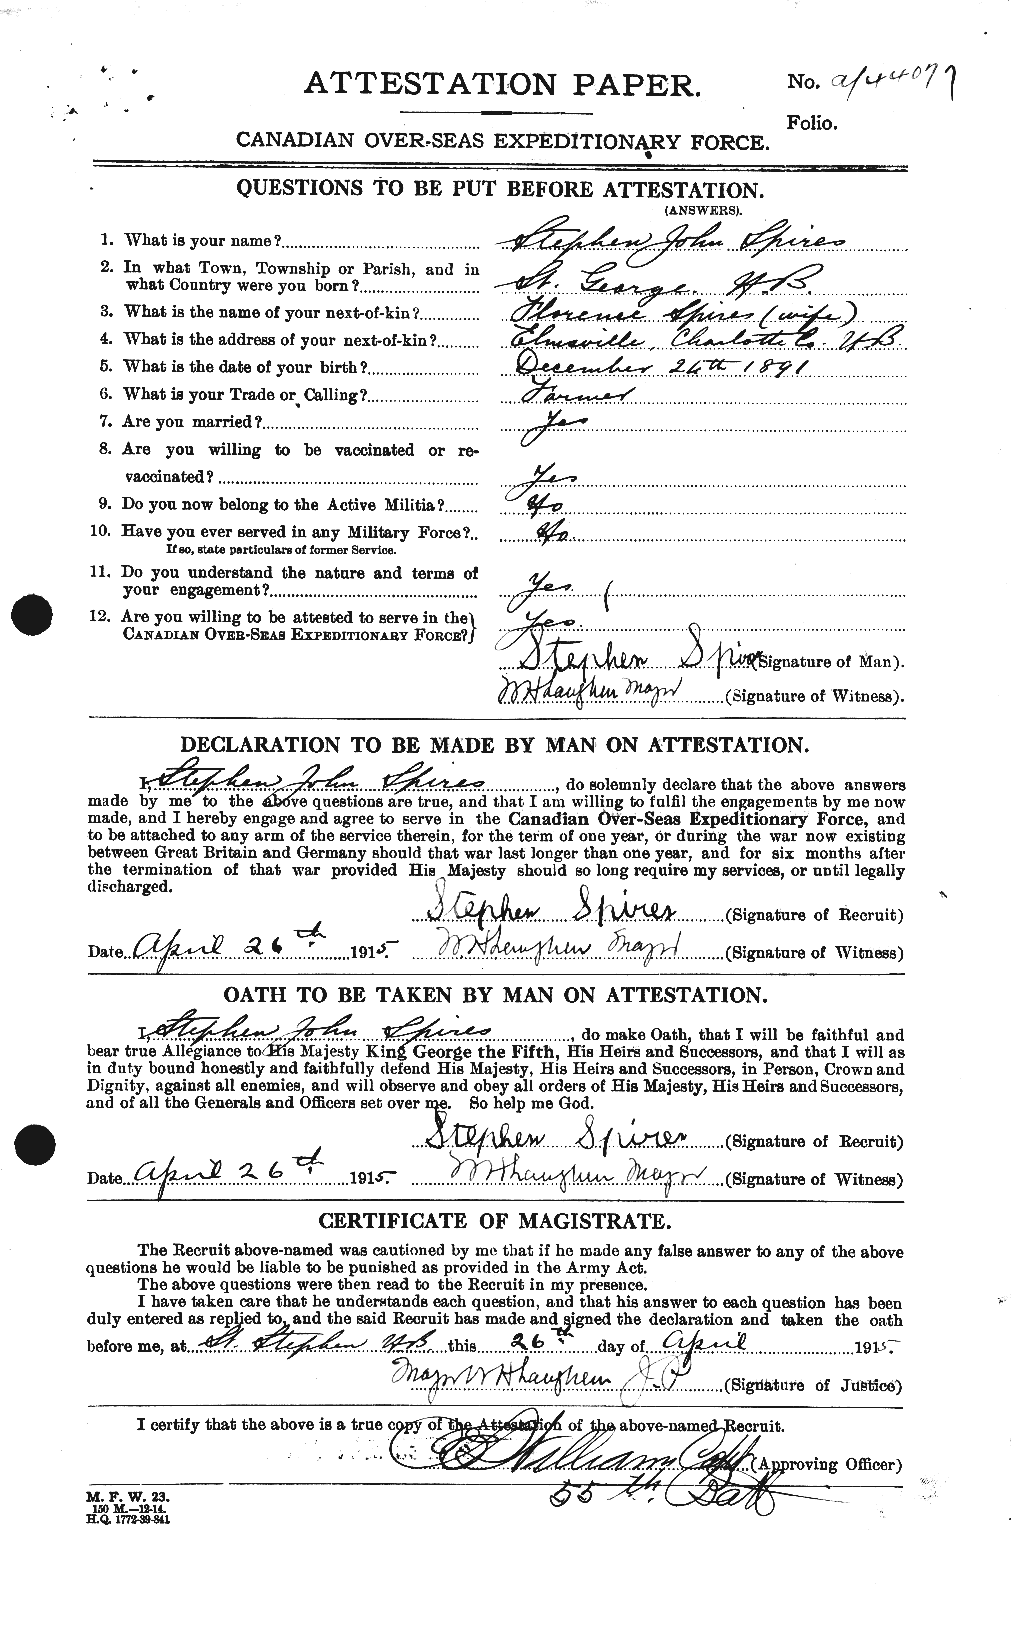 Personnel Records of the First World War - CEF 114393a